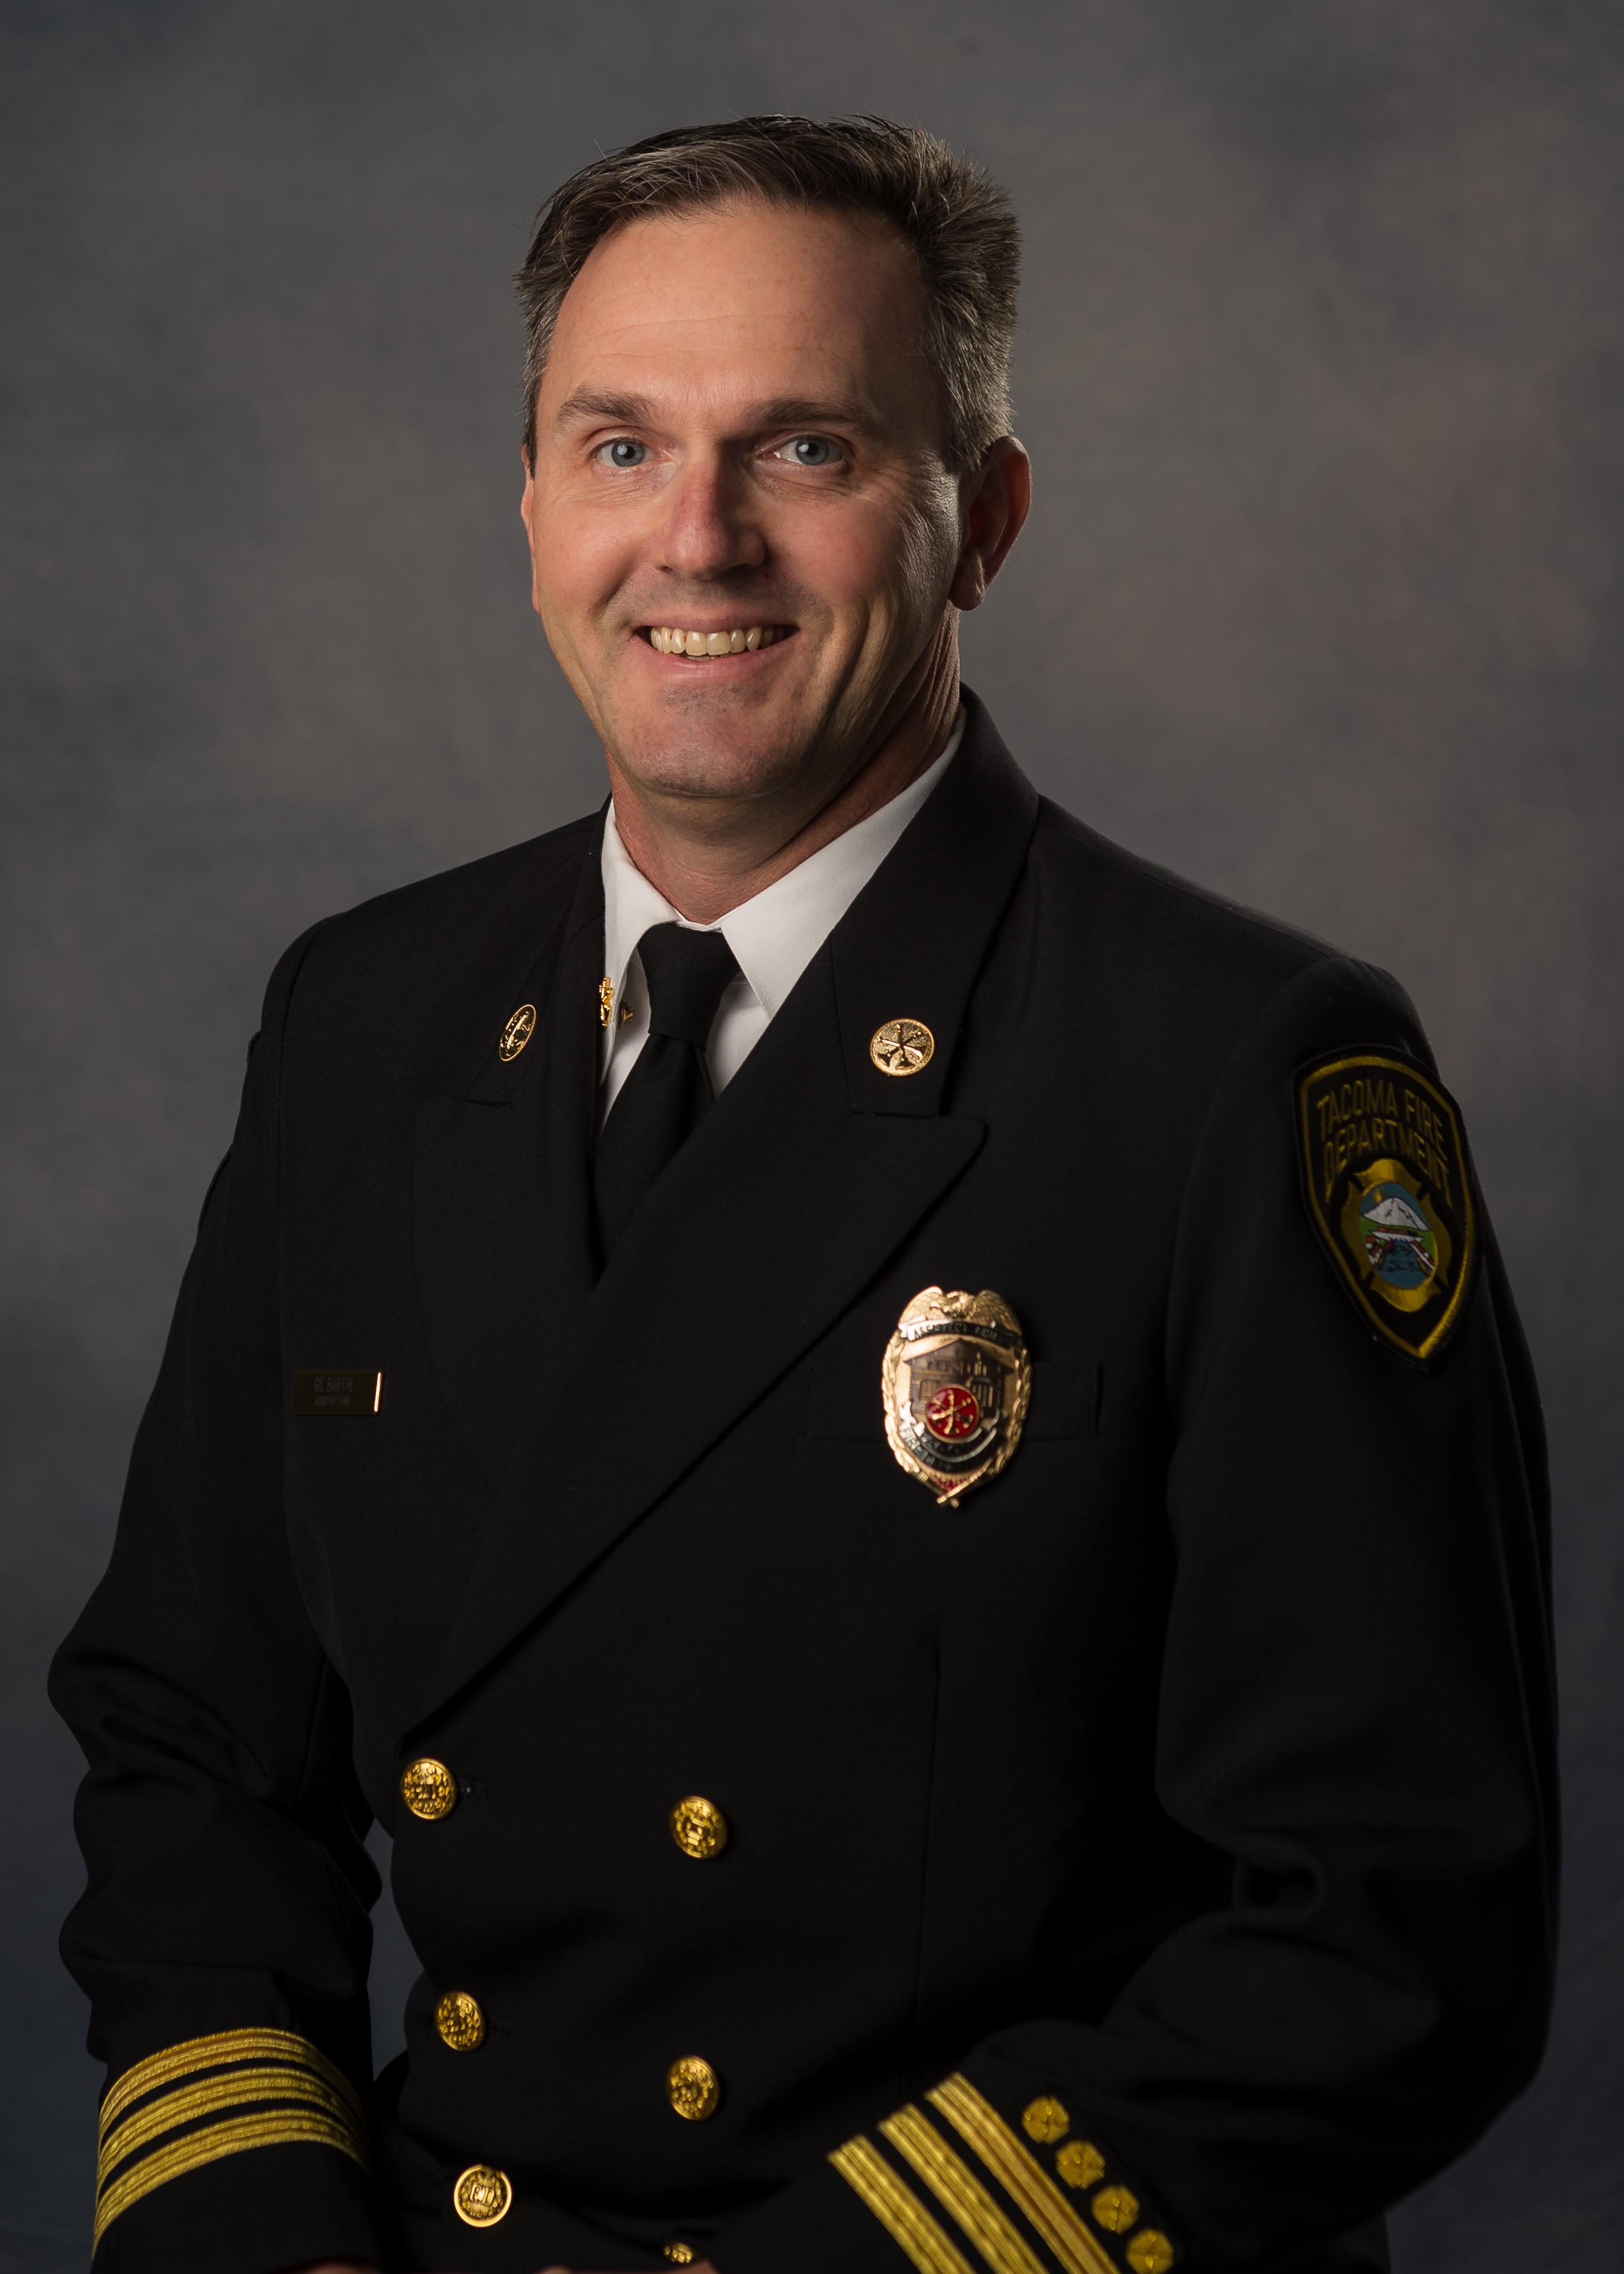 Assistant Chief Gil Barthe